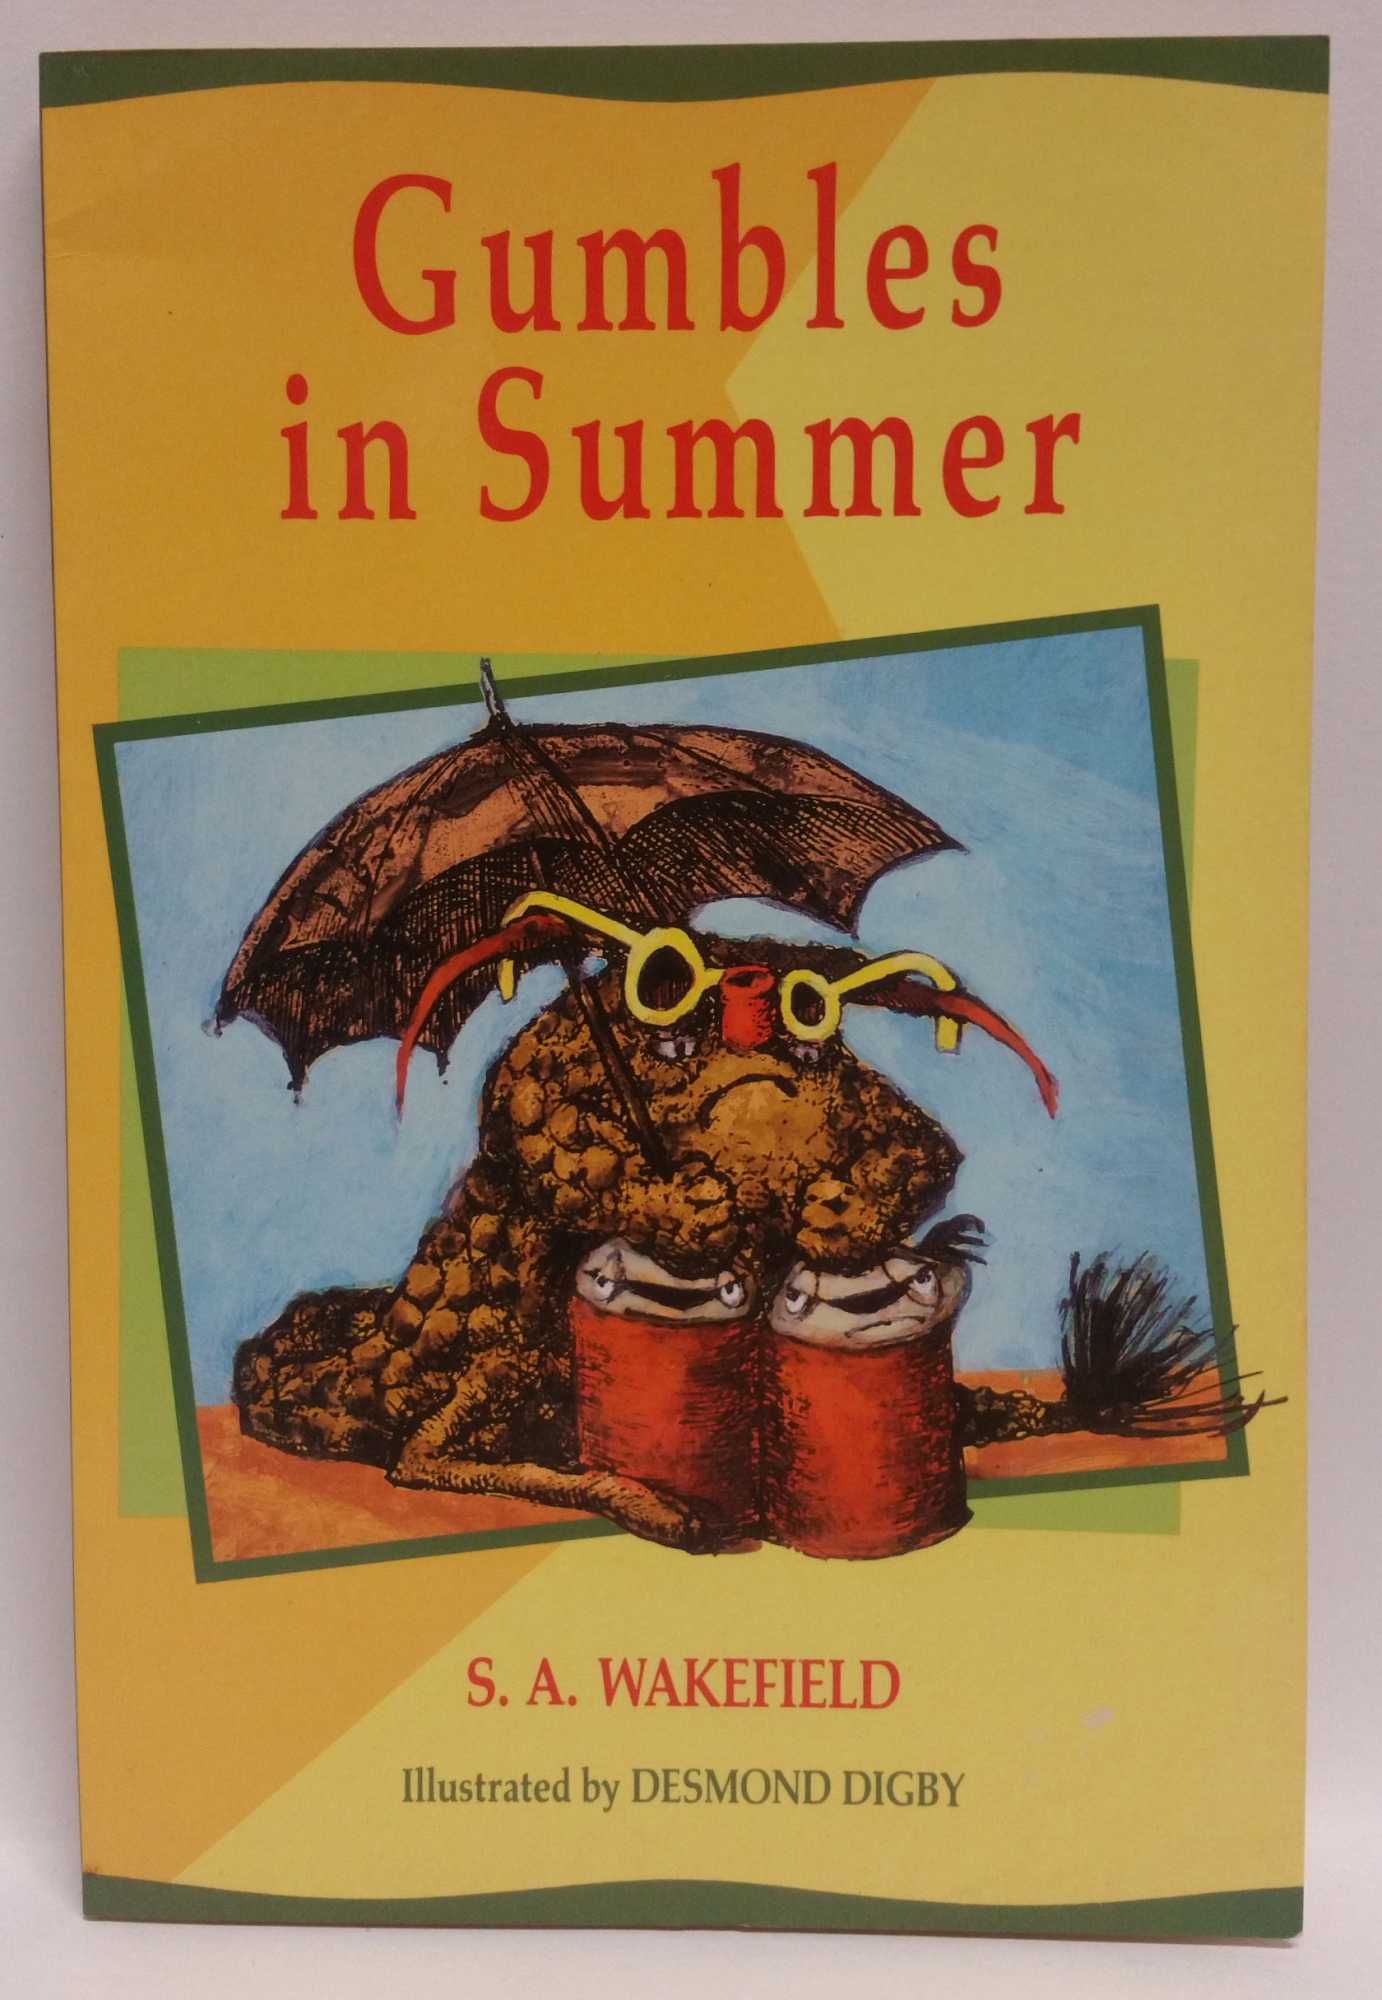 S. A. Wakefield - Gumbles in Summer